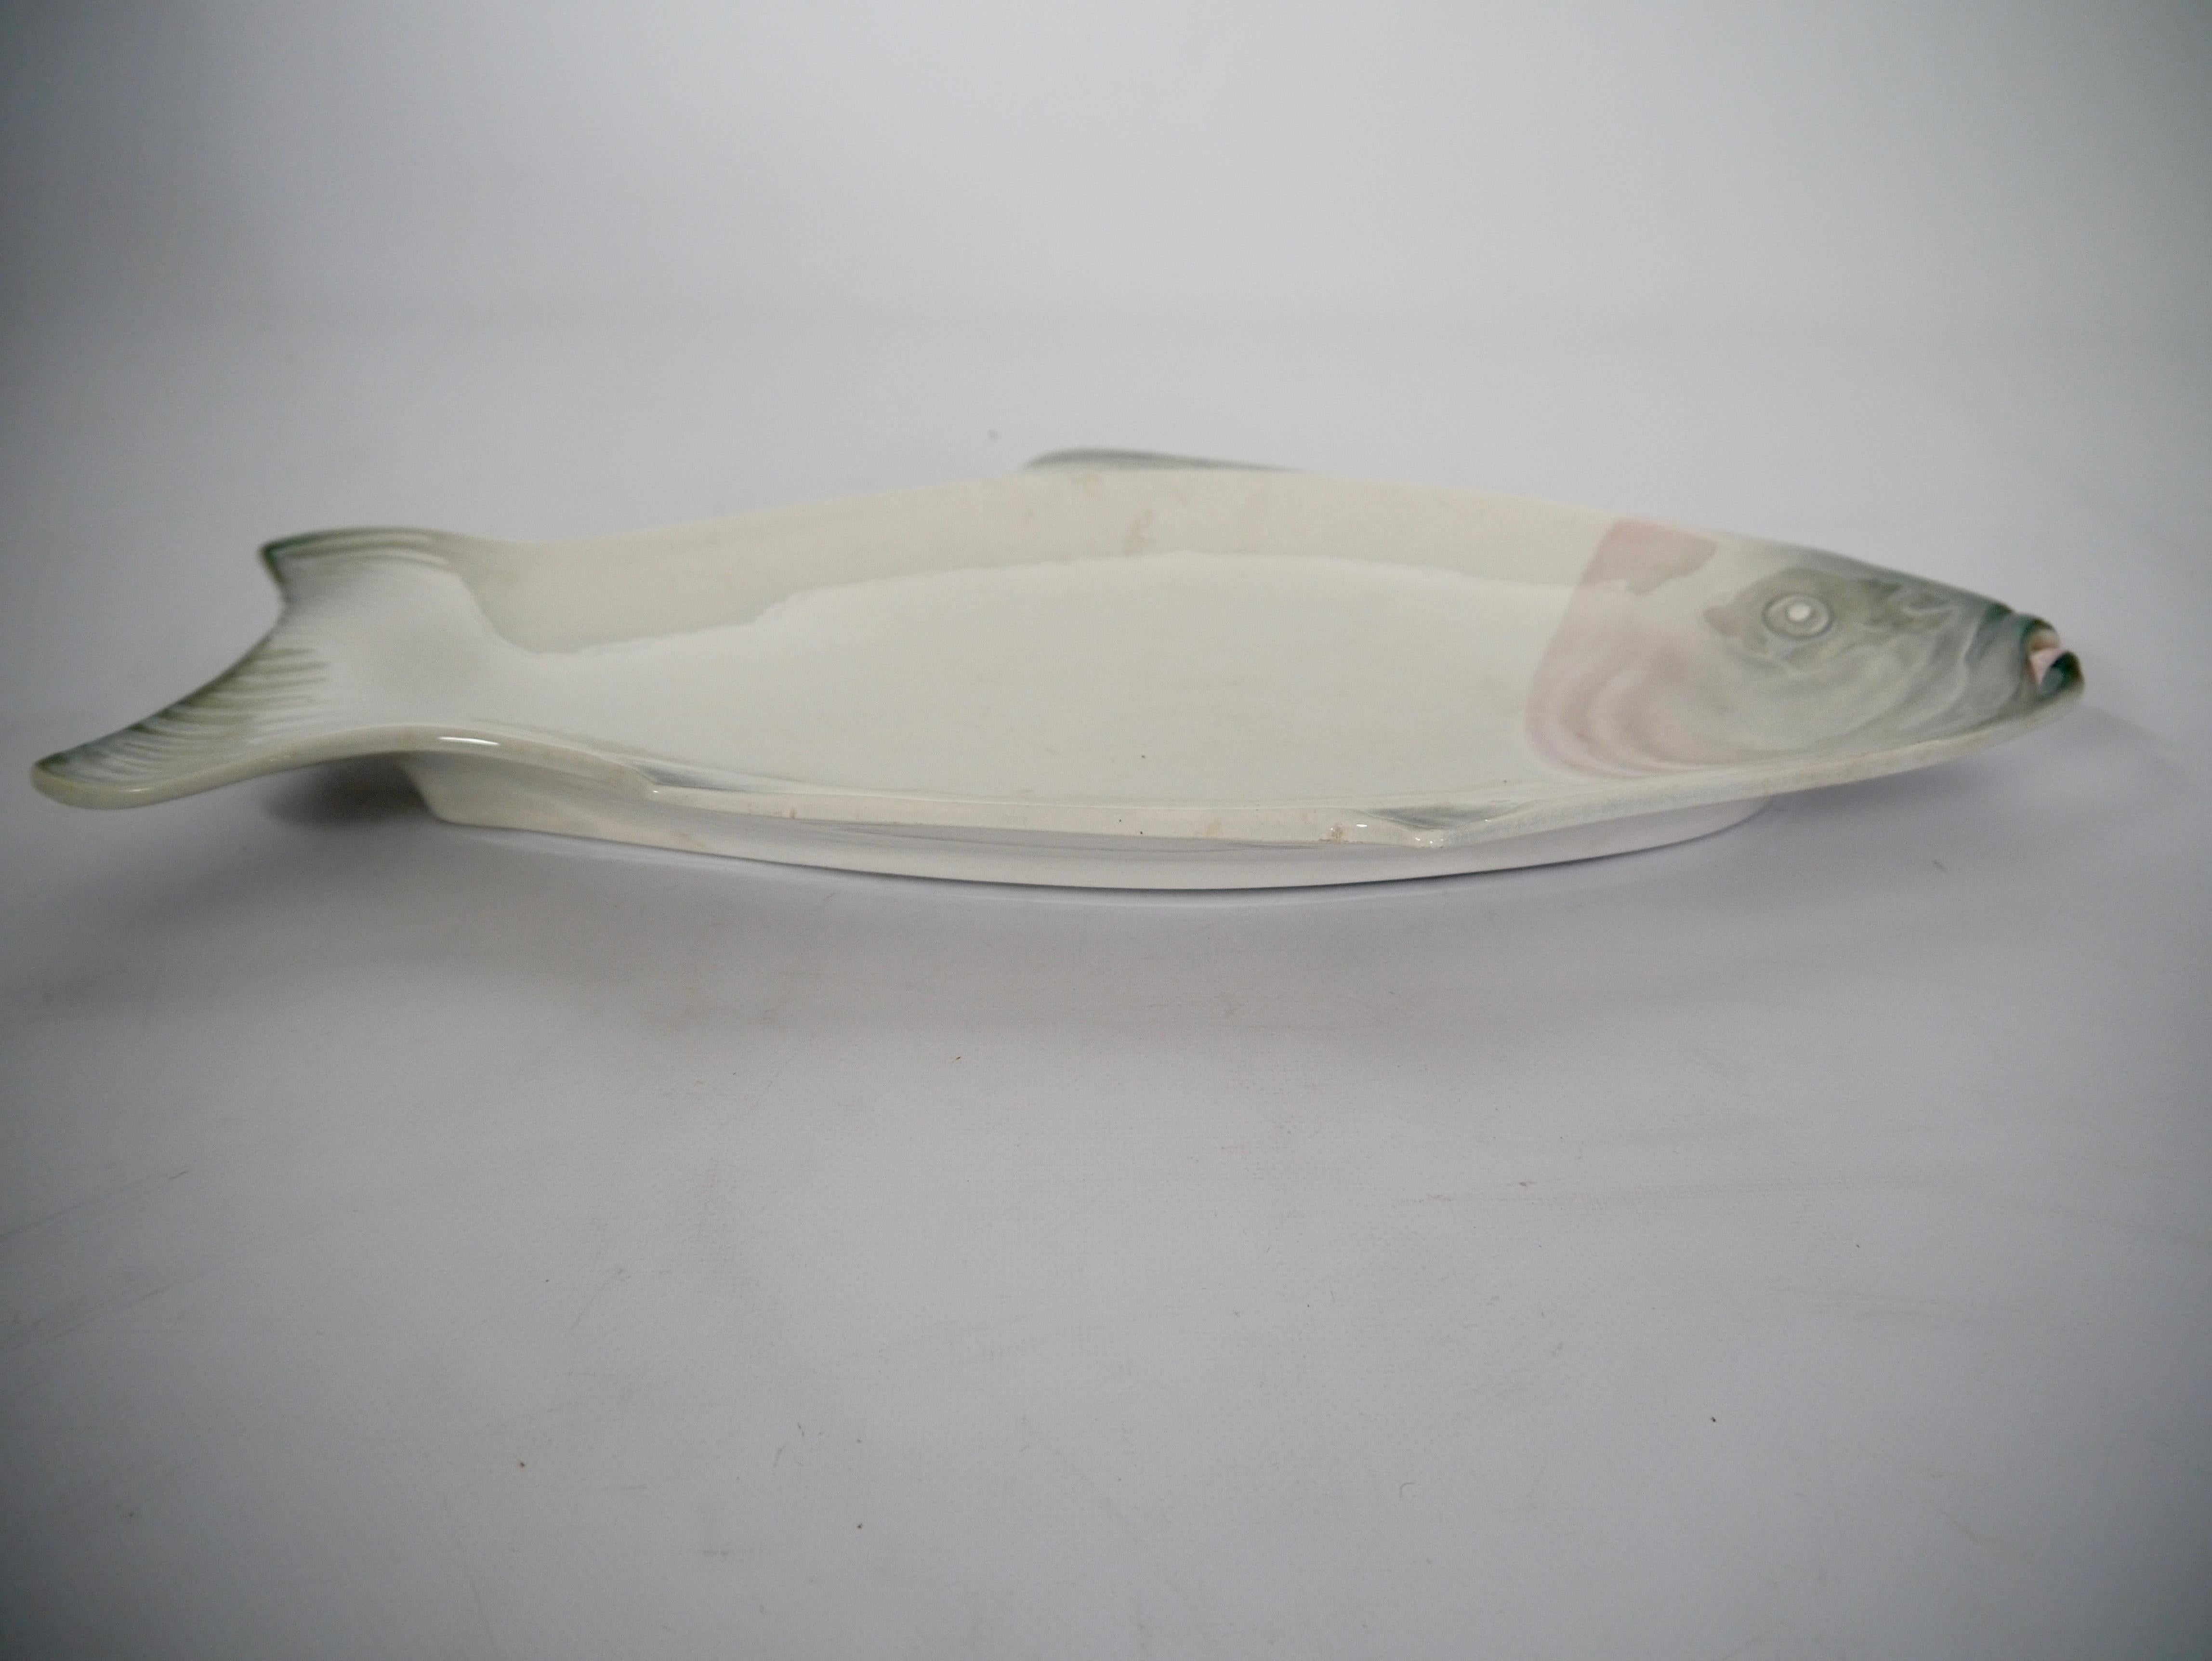 Antique porcelain fish tray / platter with wonderful patina, fabricated by Göteborgs Porslinsfabrik in the 1910s. 

